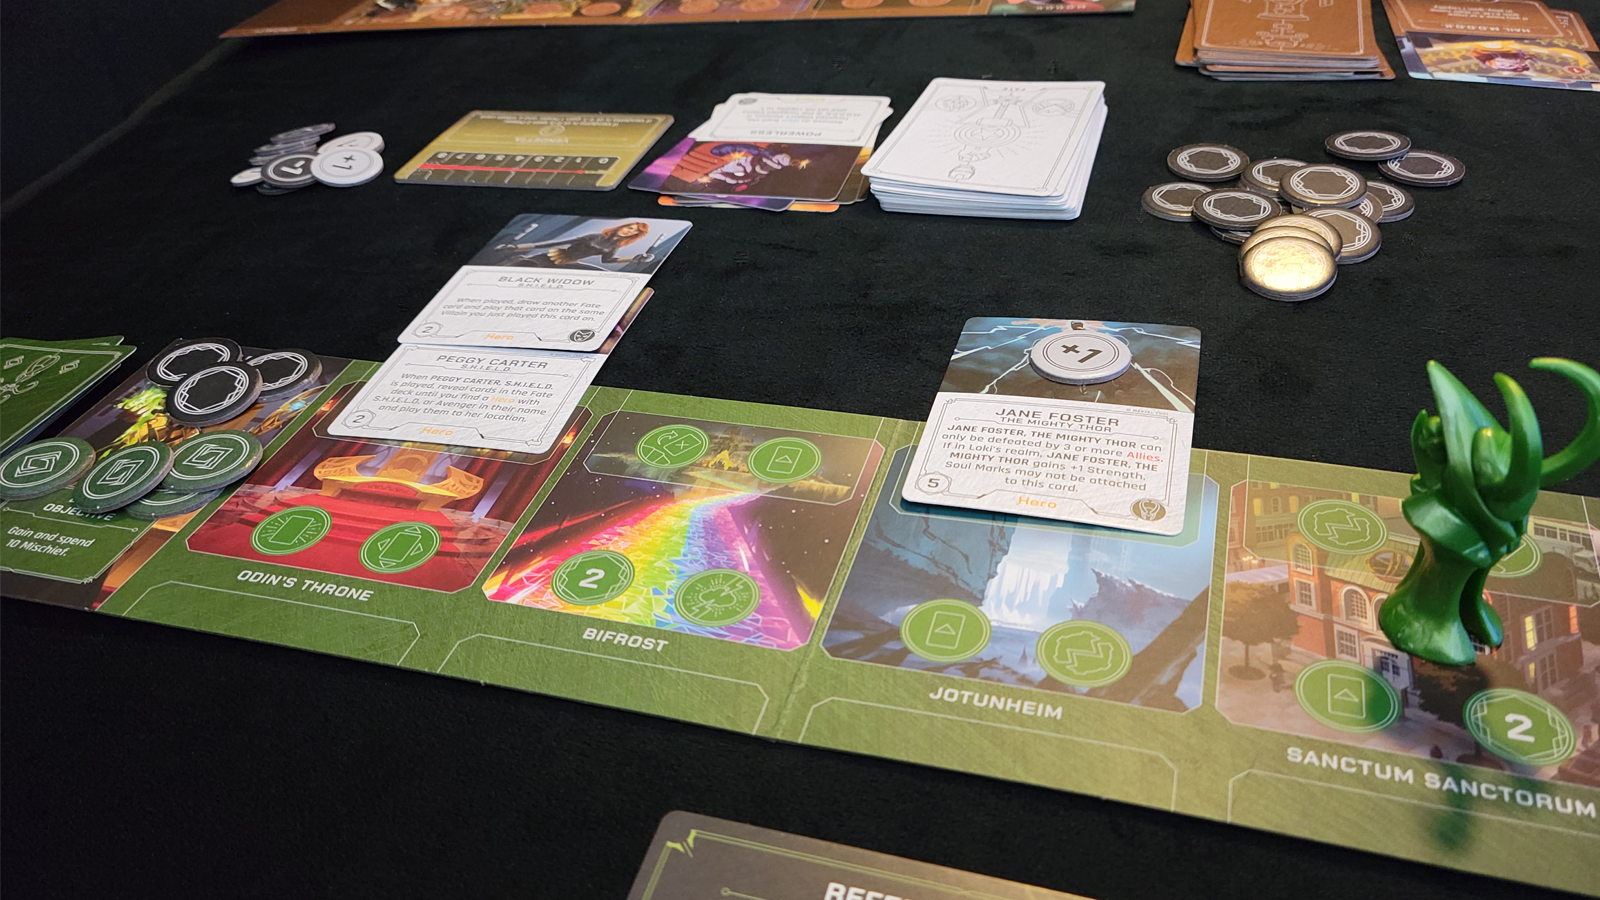 Loki's Domain with opponent cards and tokens in play